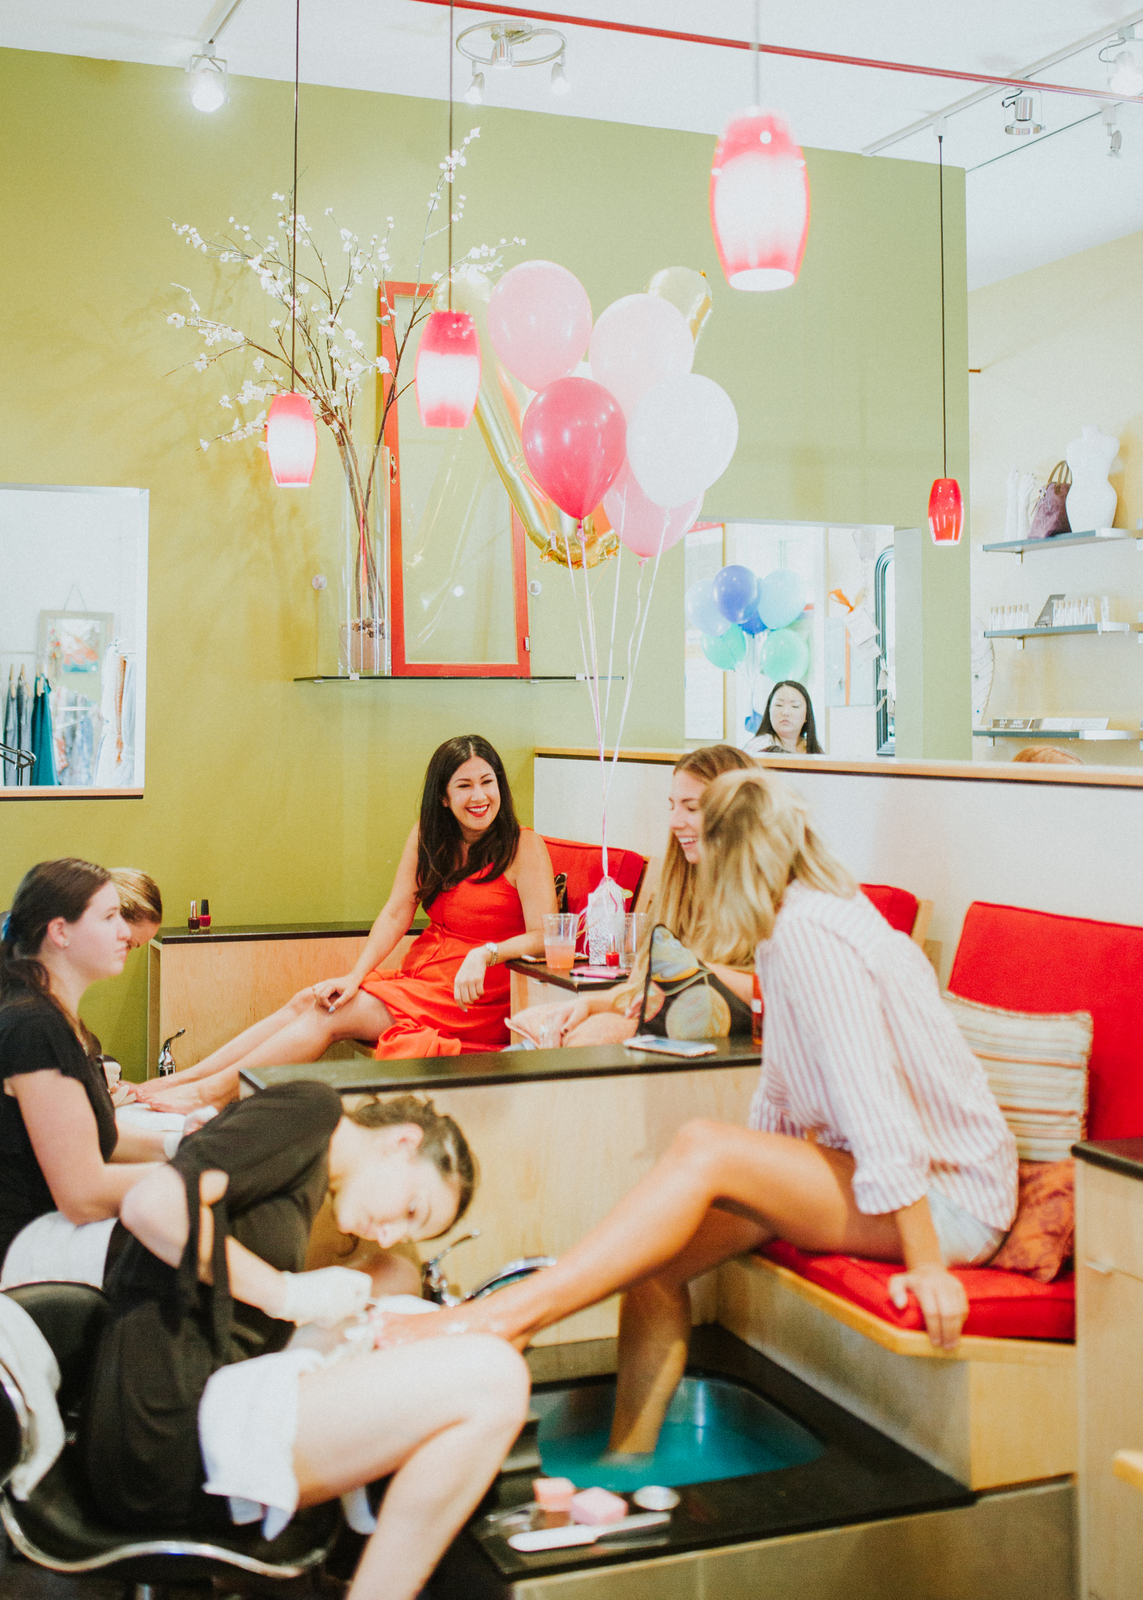 How To Plan The Perfect Girls Day Out! by popular Utah blogger Sandy A La Mode